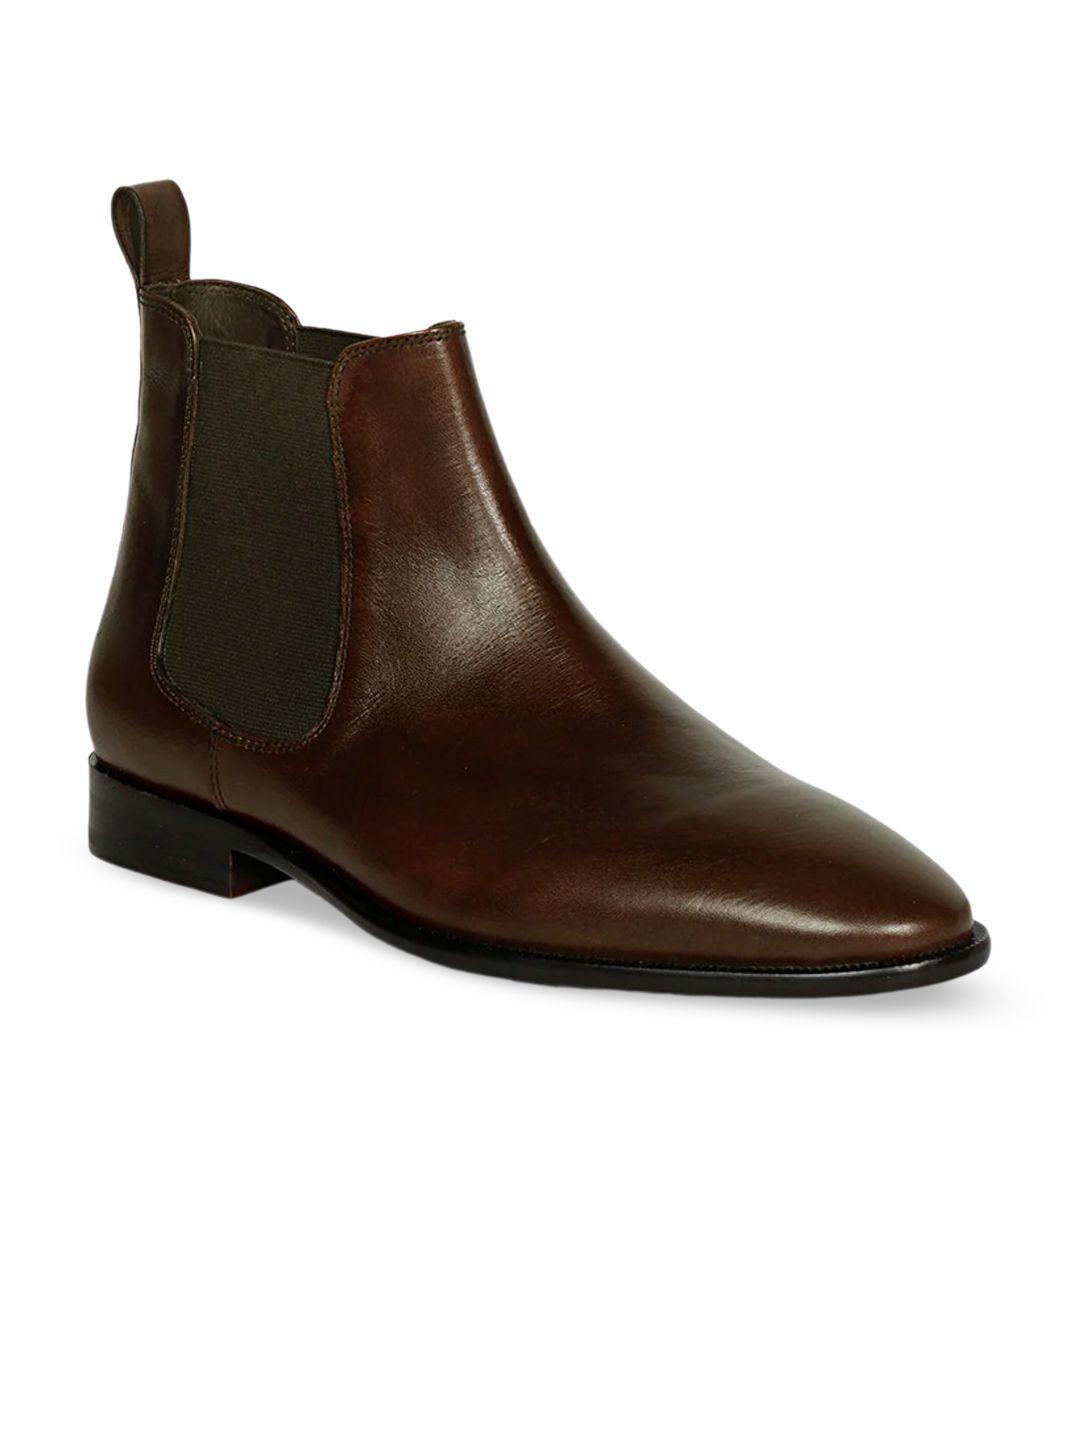 saint g men solid leather mid top chelsea boots